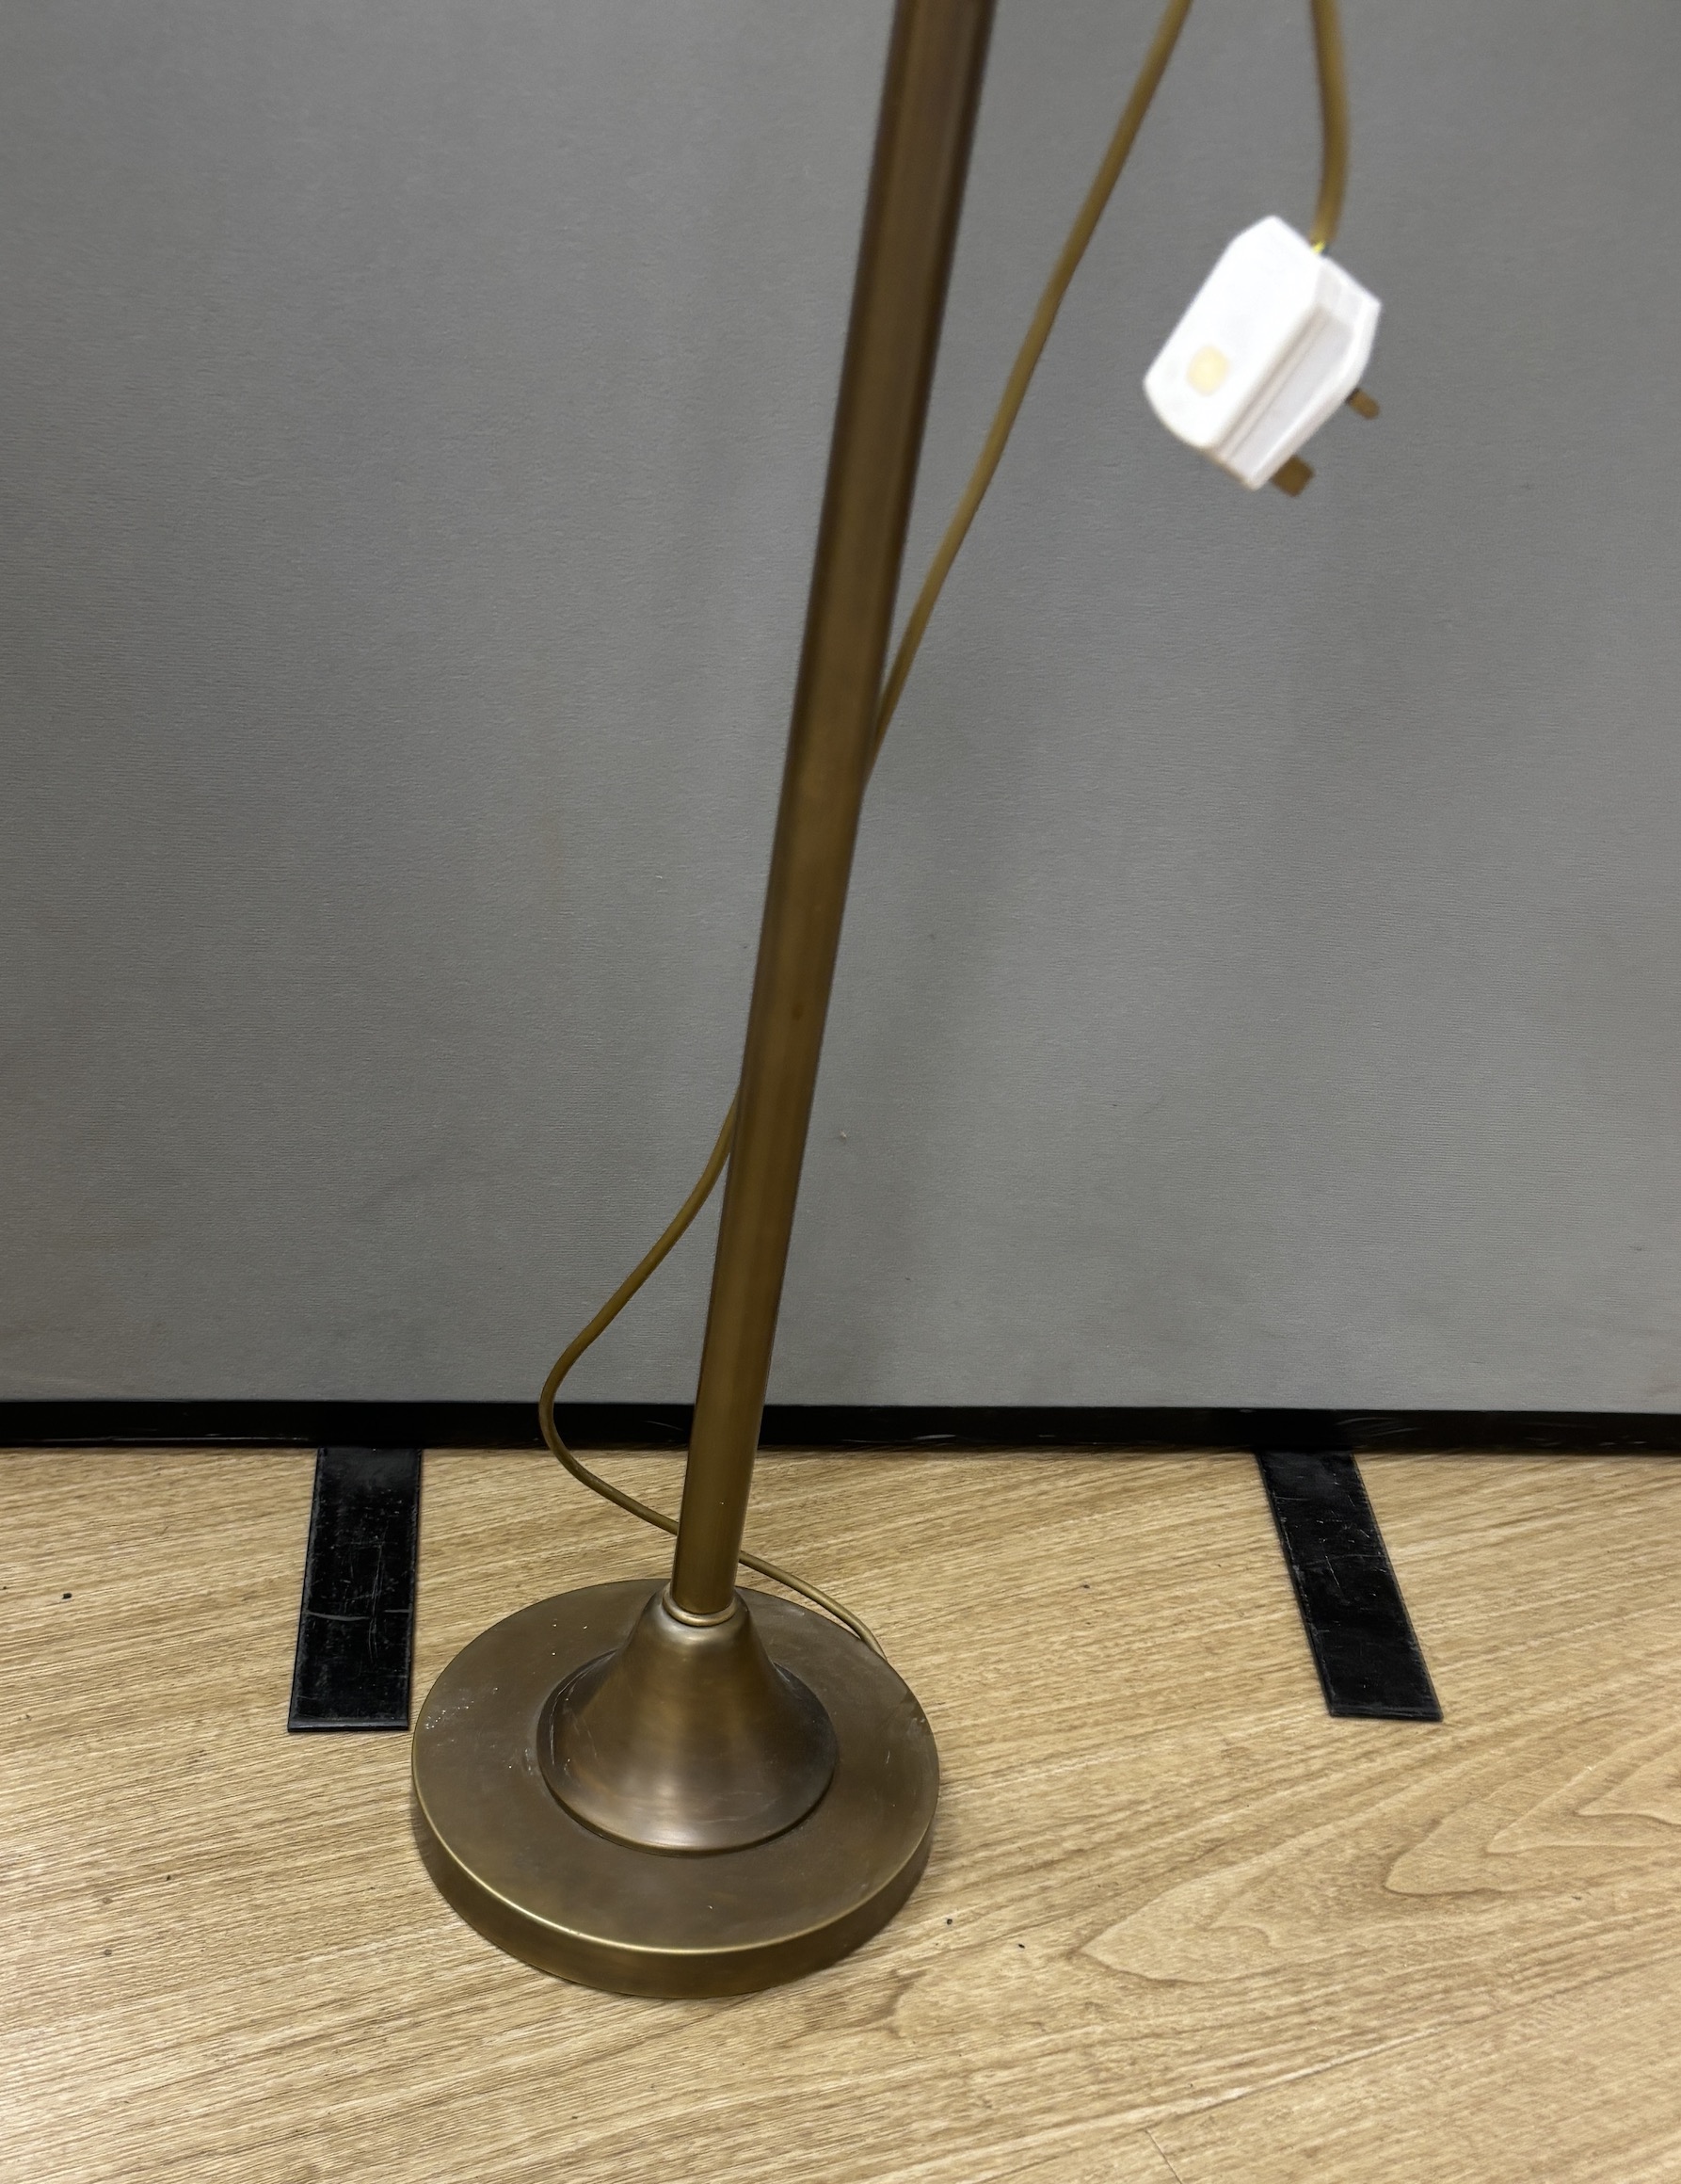 A telescopic lamp standard, height including shade 142cm